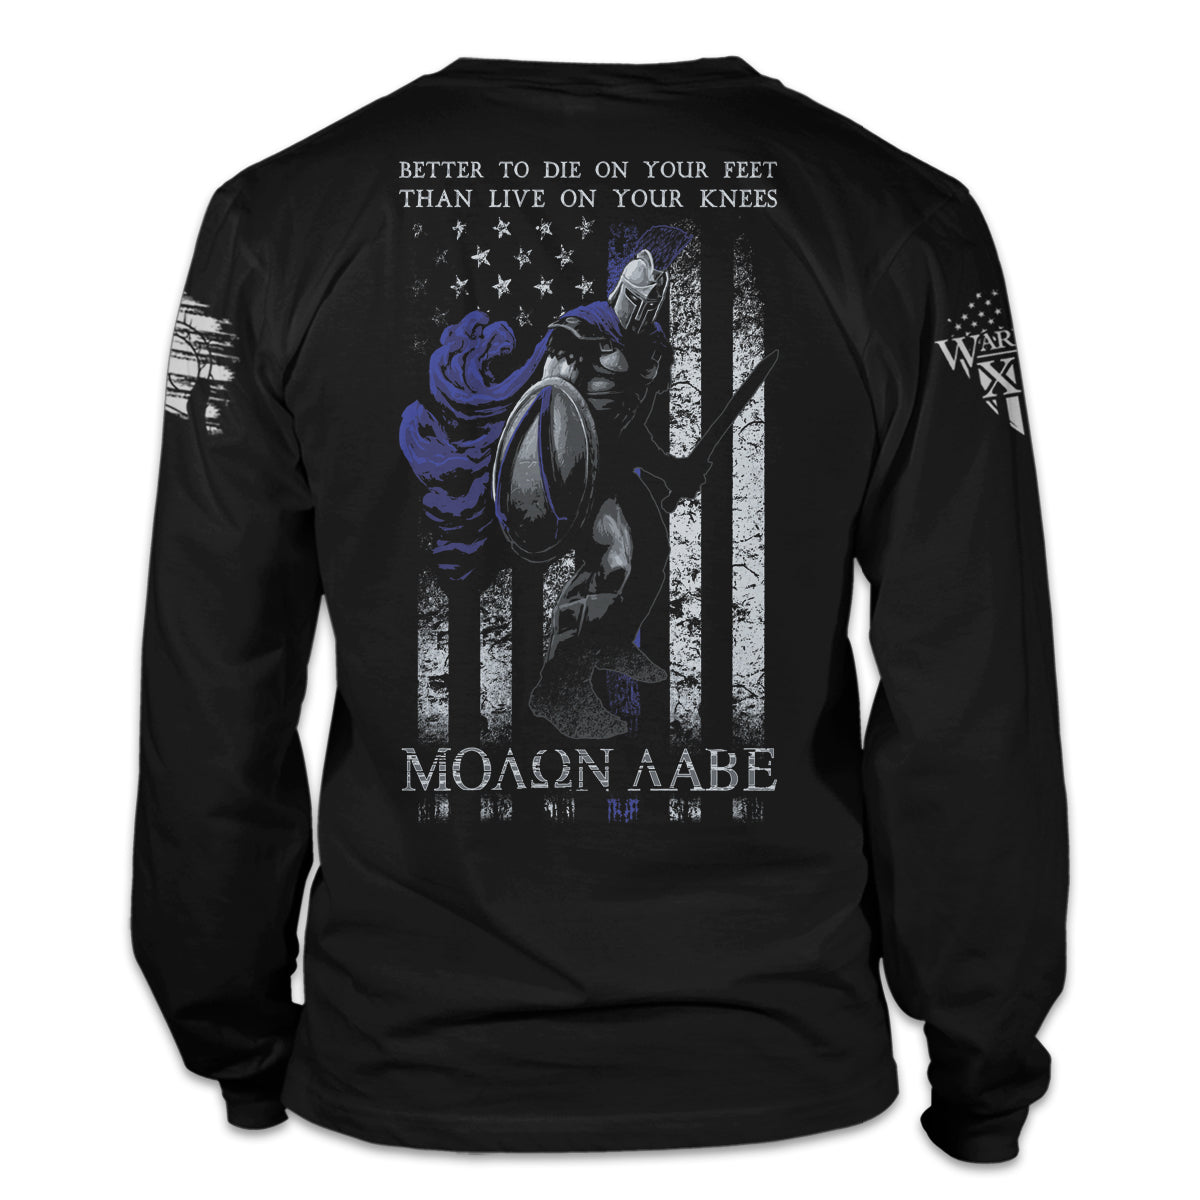 A black long sleeve shirt thin blue line edition with the words "Better To Die On Your Feet Than Live On Your Knees, "MOLON LABE" with a spartan in front of the USA flag printed on the back of the shirt.